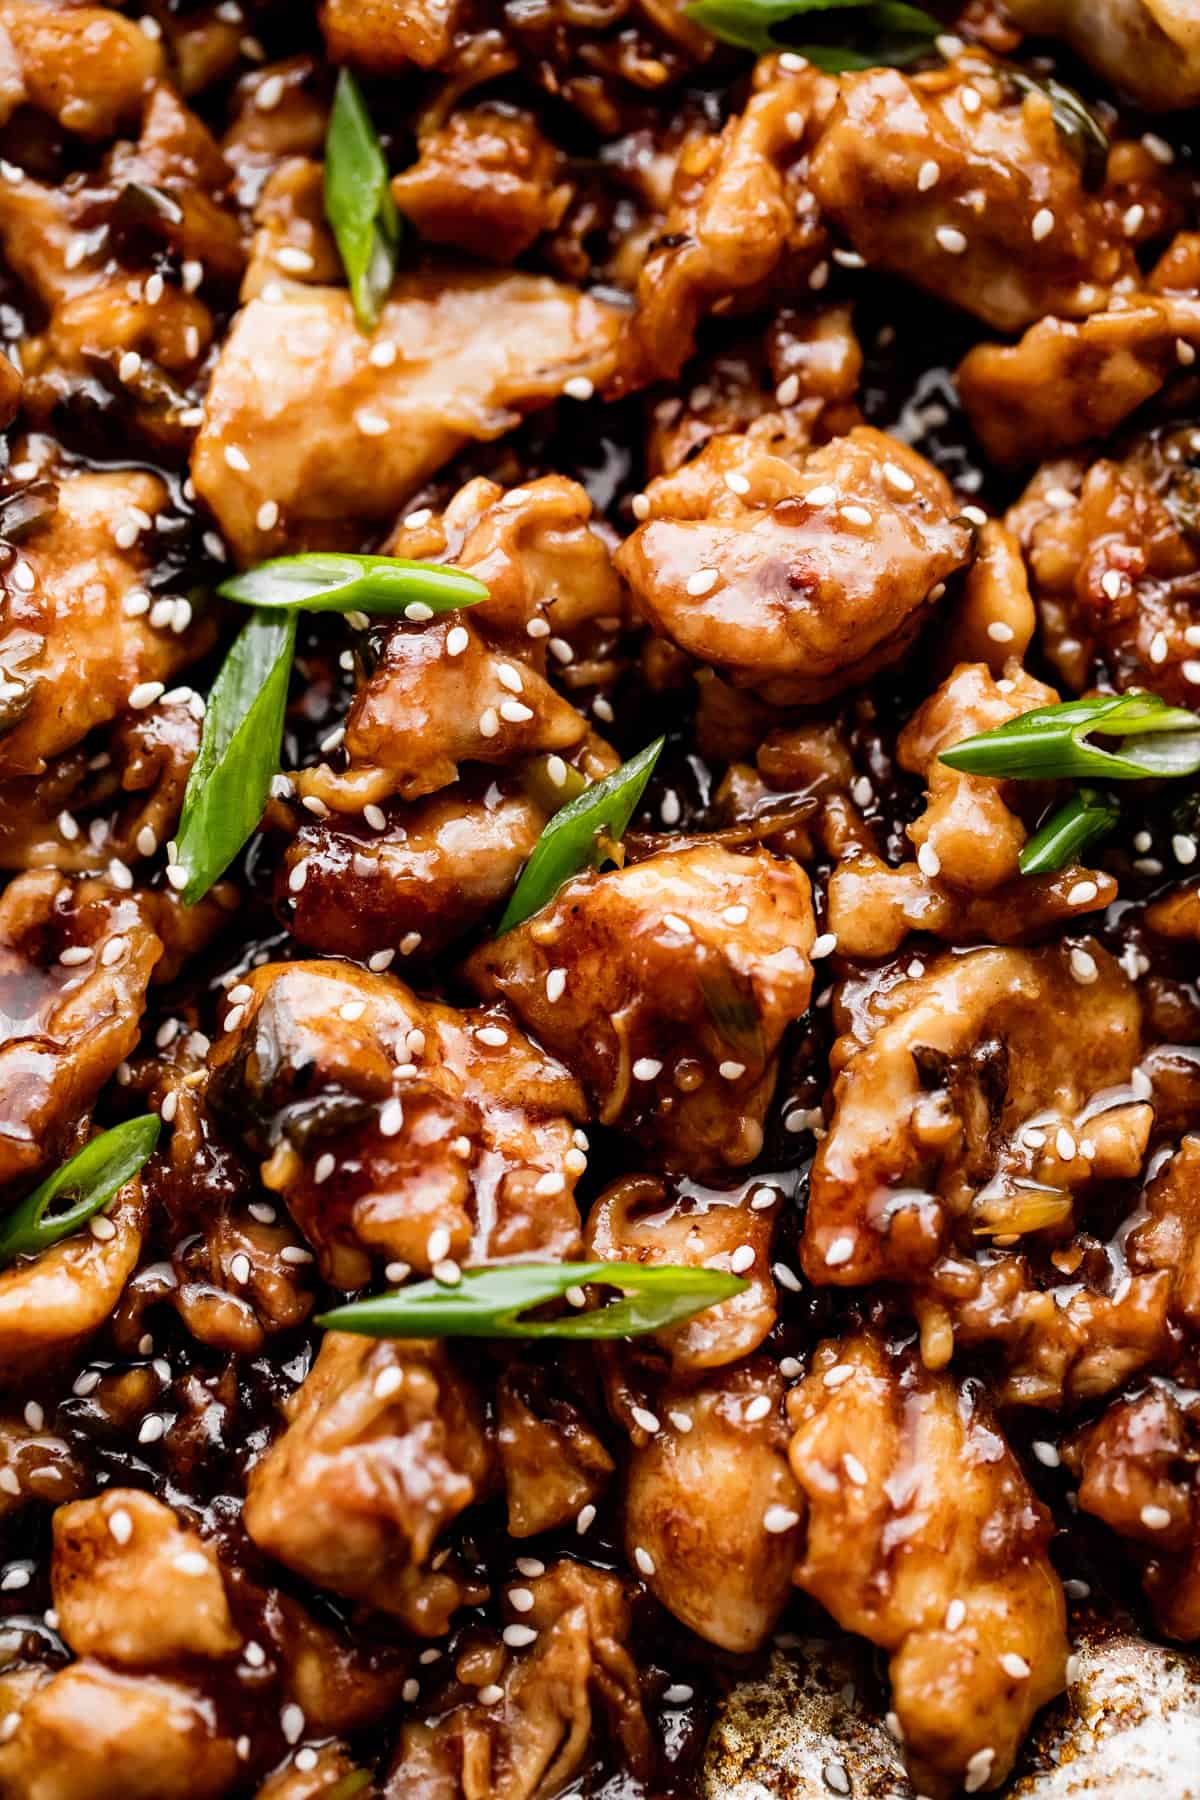 up close shot of cut up chicken thighs covered in bourbon sauce and topped with sesame seeds and sliced green onions.